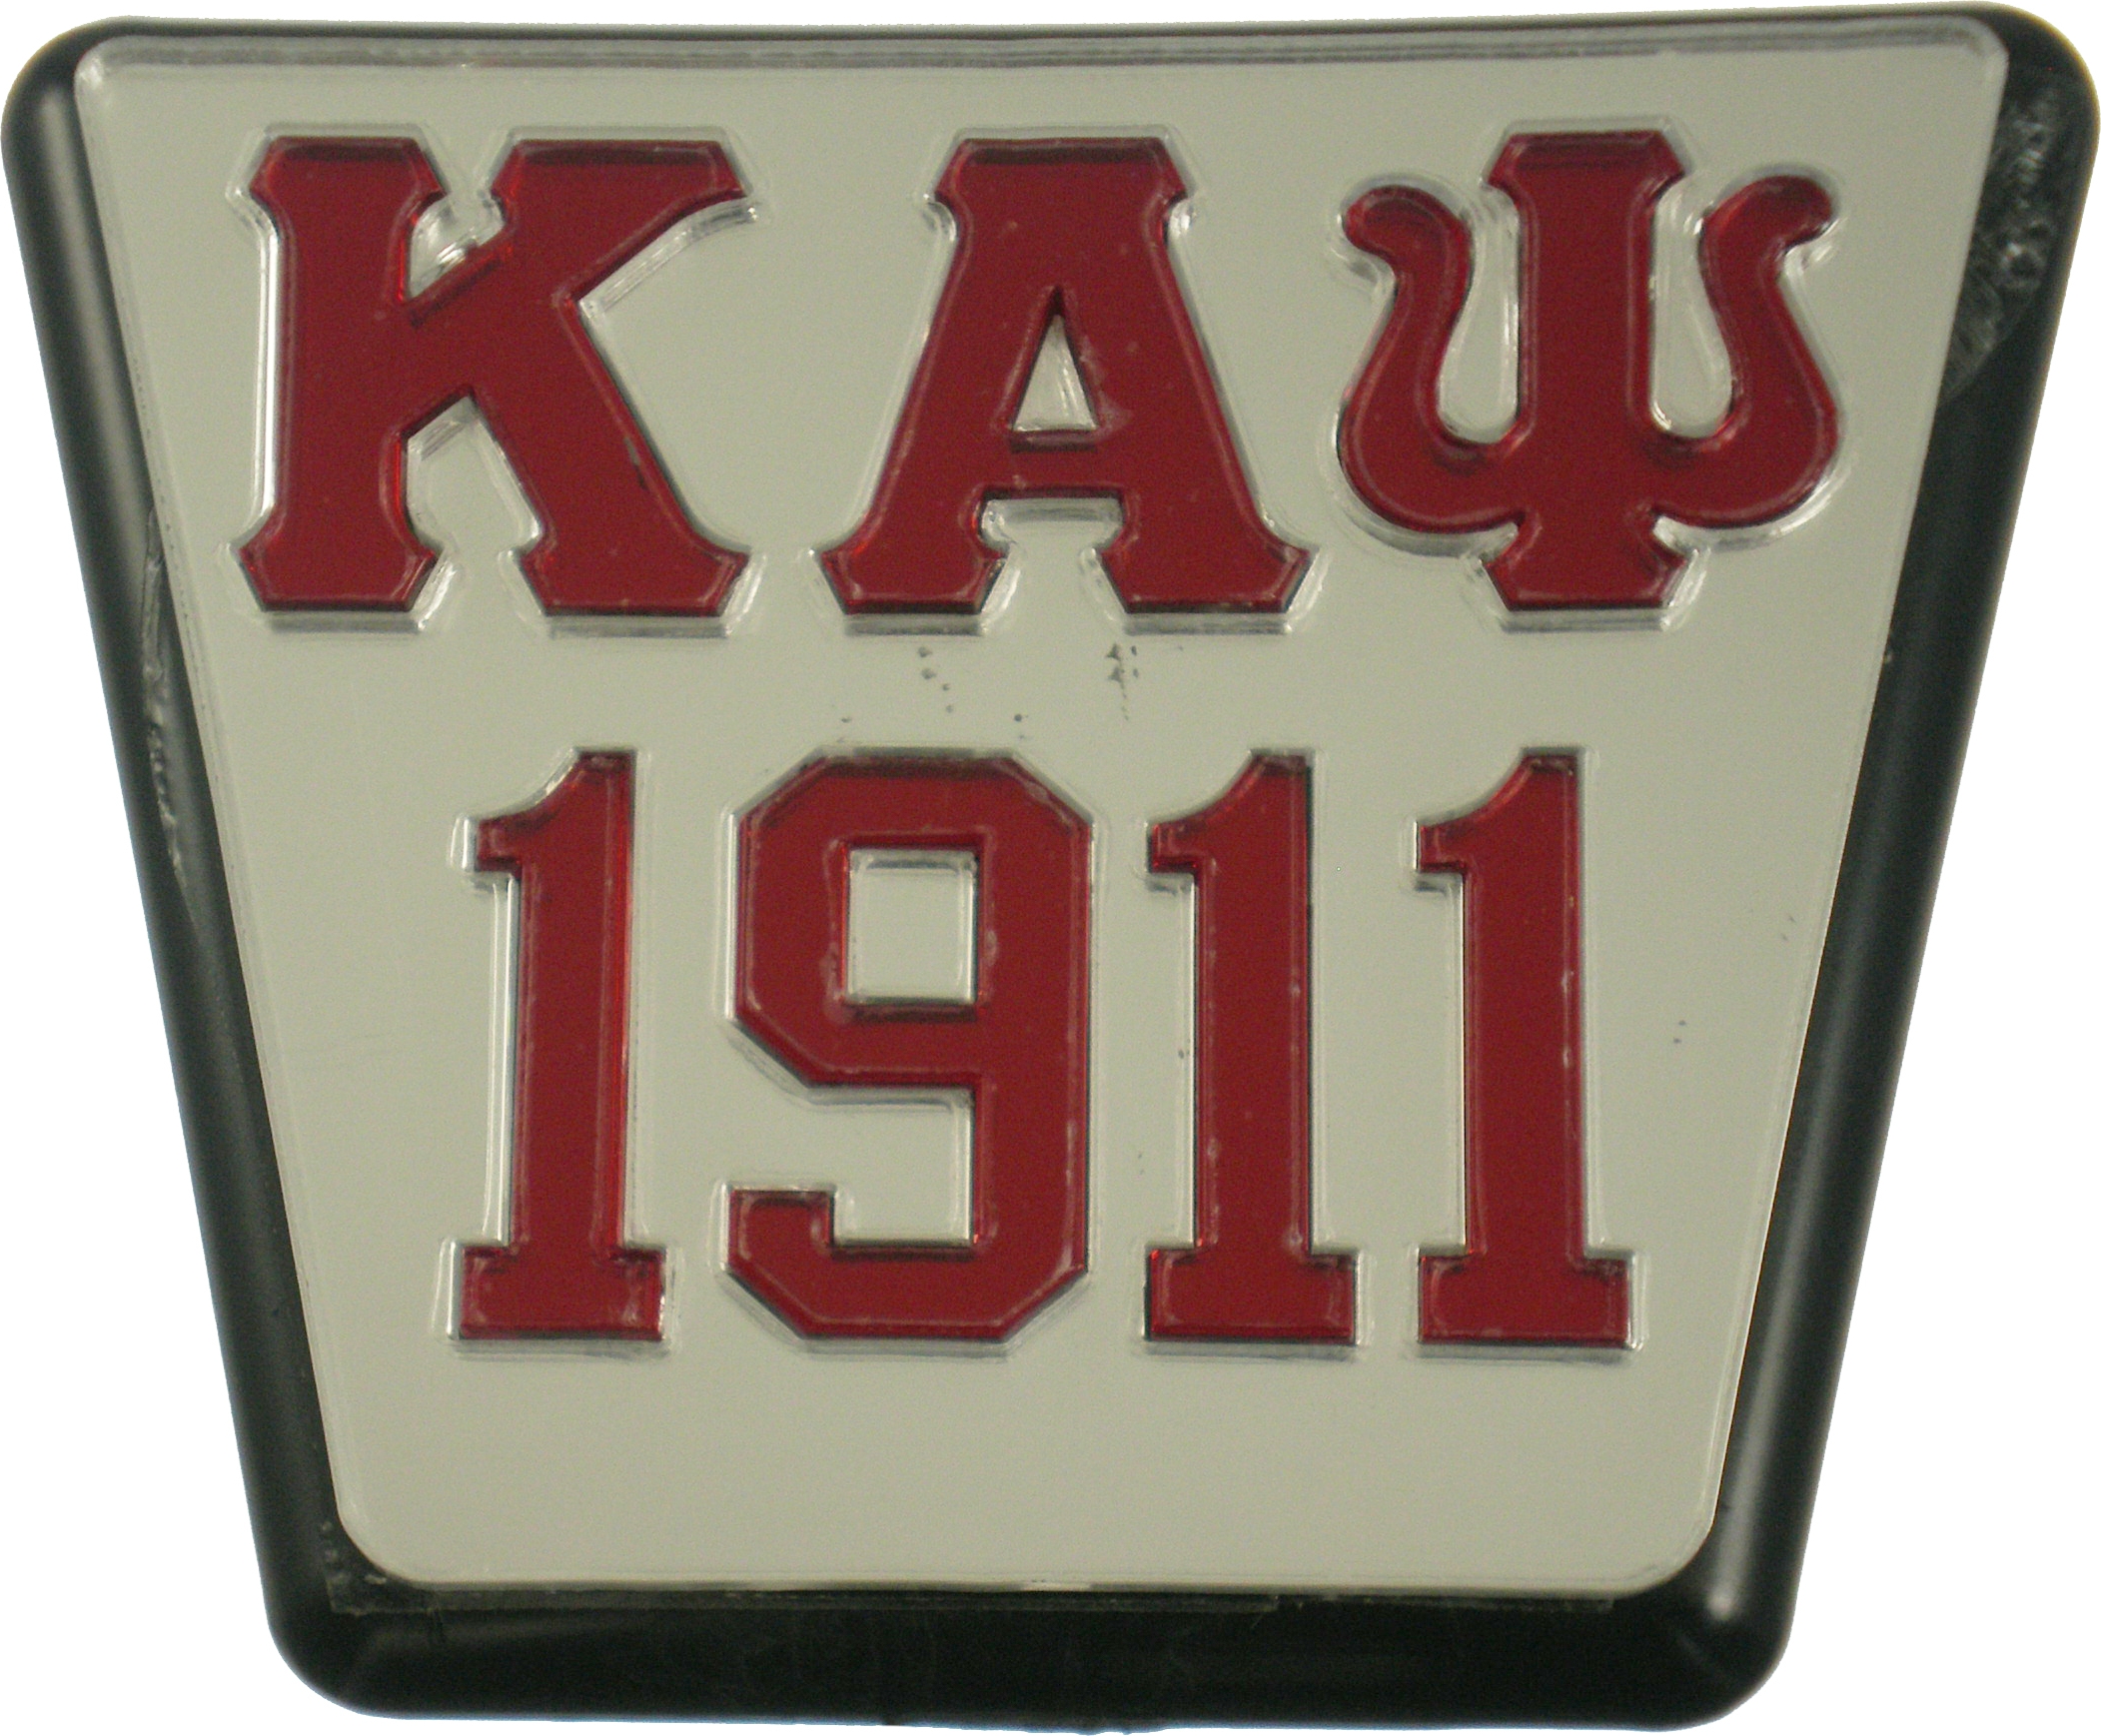 Kappa Alpha Psi® 1911 Trailer Hitch Cover [Silver/Red - 2"R] > Product Details | The Cultural Shop = Apparel & Gifts